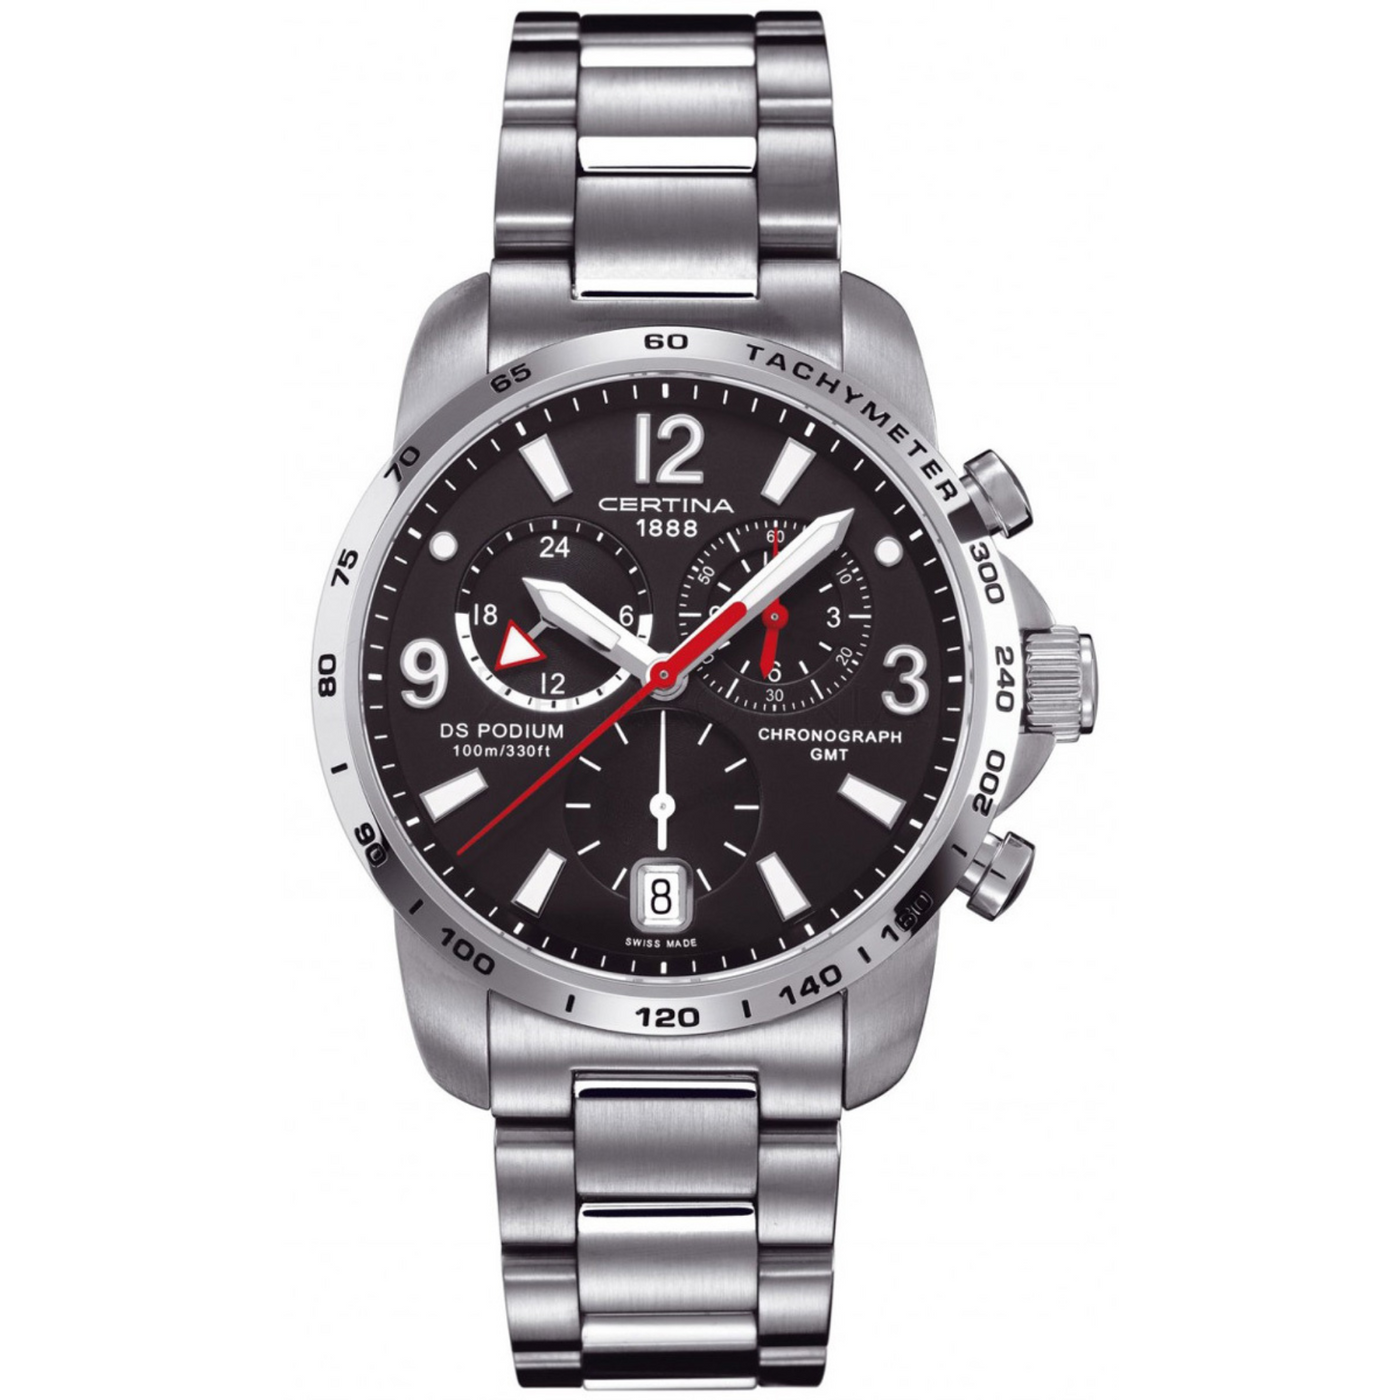 Certina DS Podium GMT Chrono - Gharyal by Collectibles 